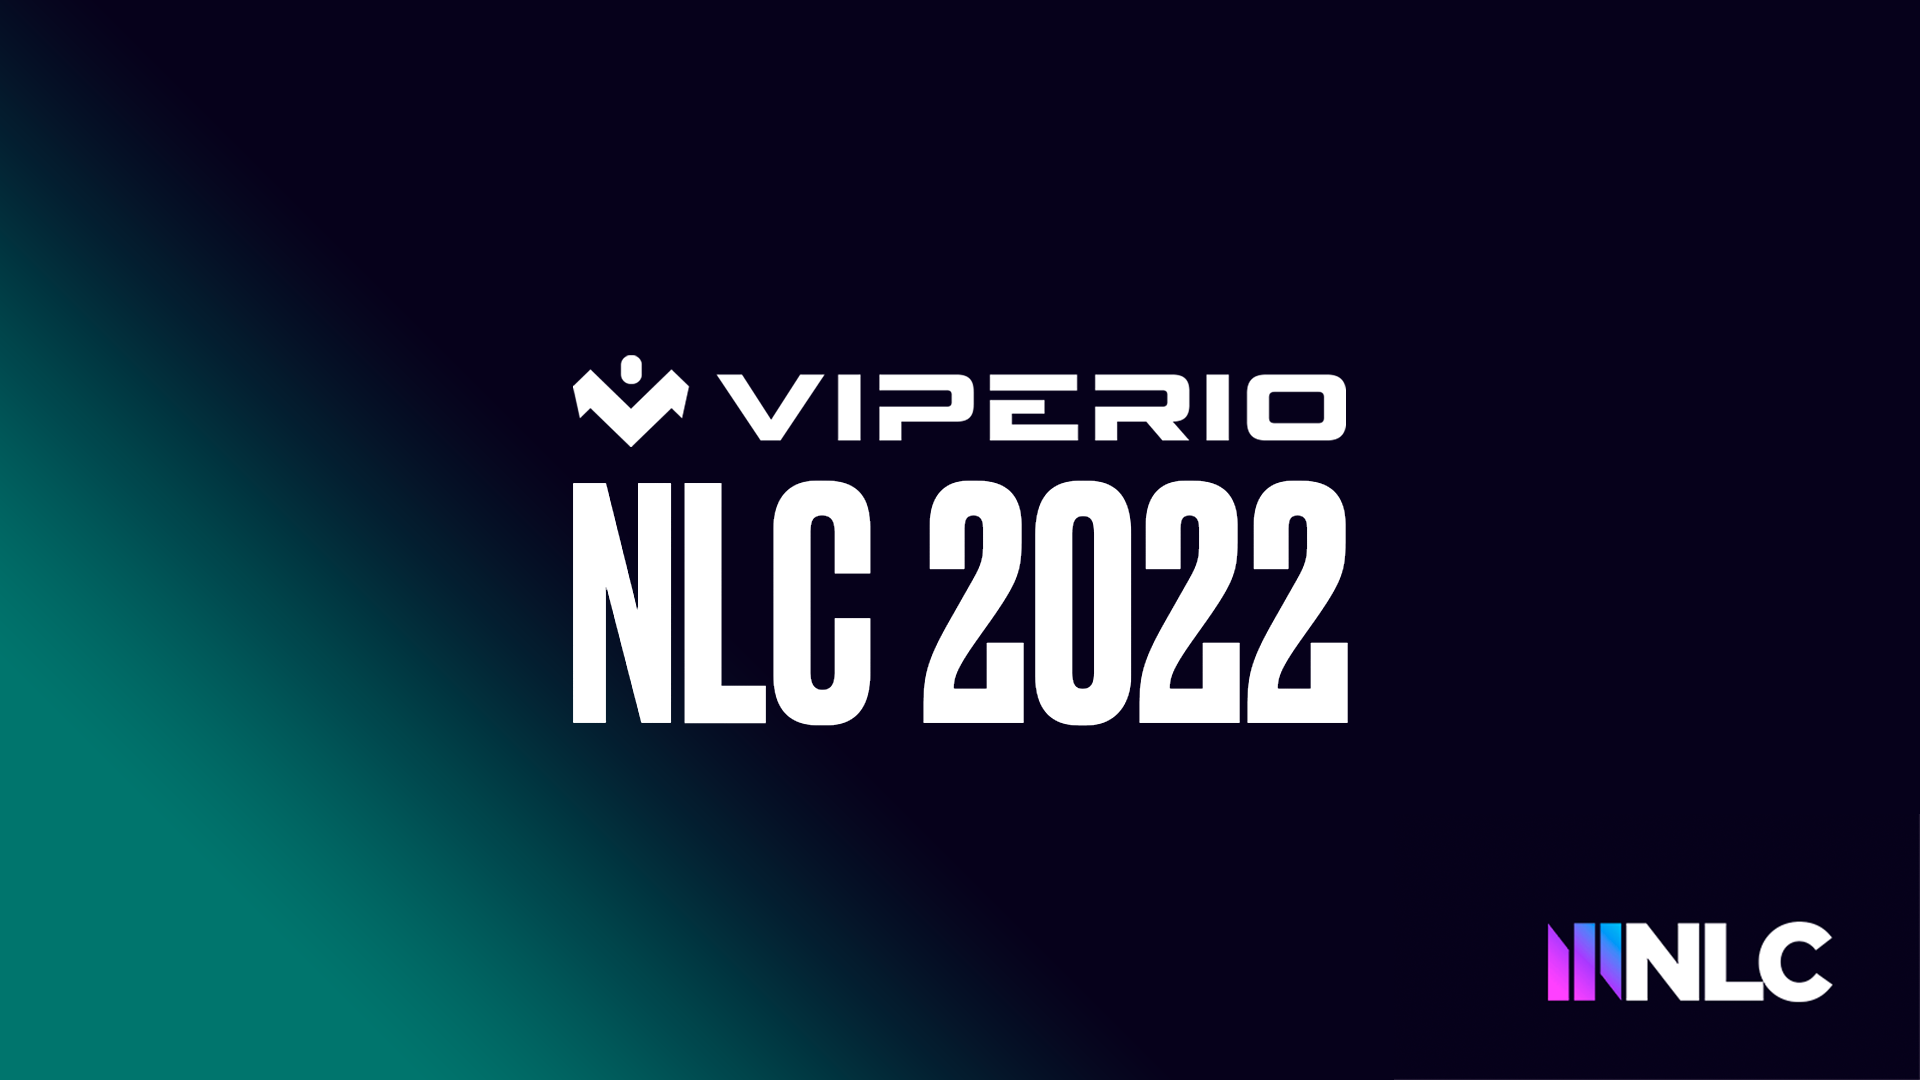 Viperio placed into NLC Division 3.4 for Spring Split